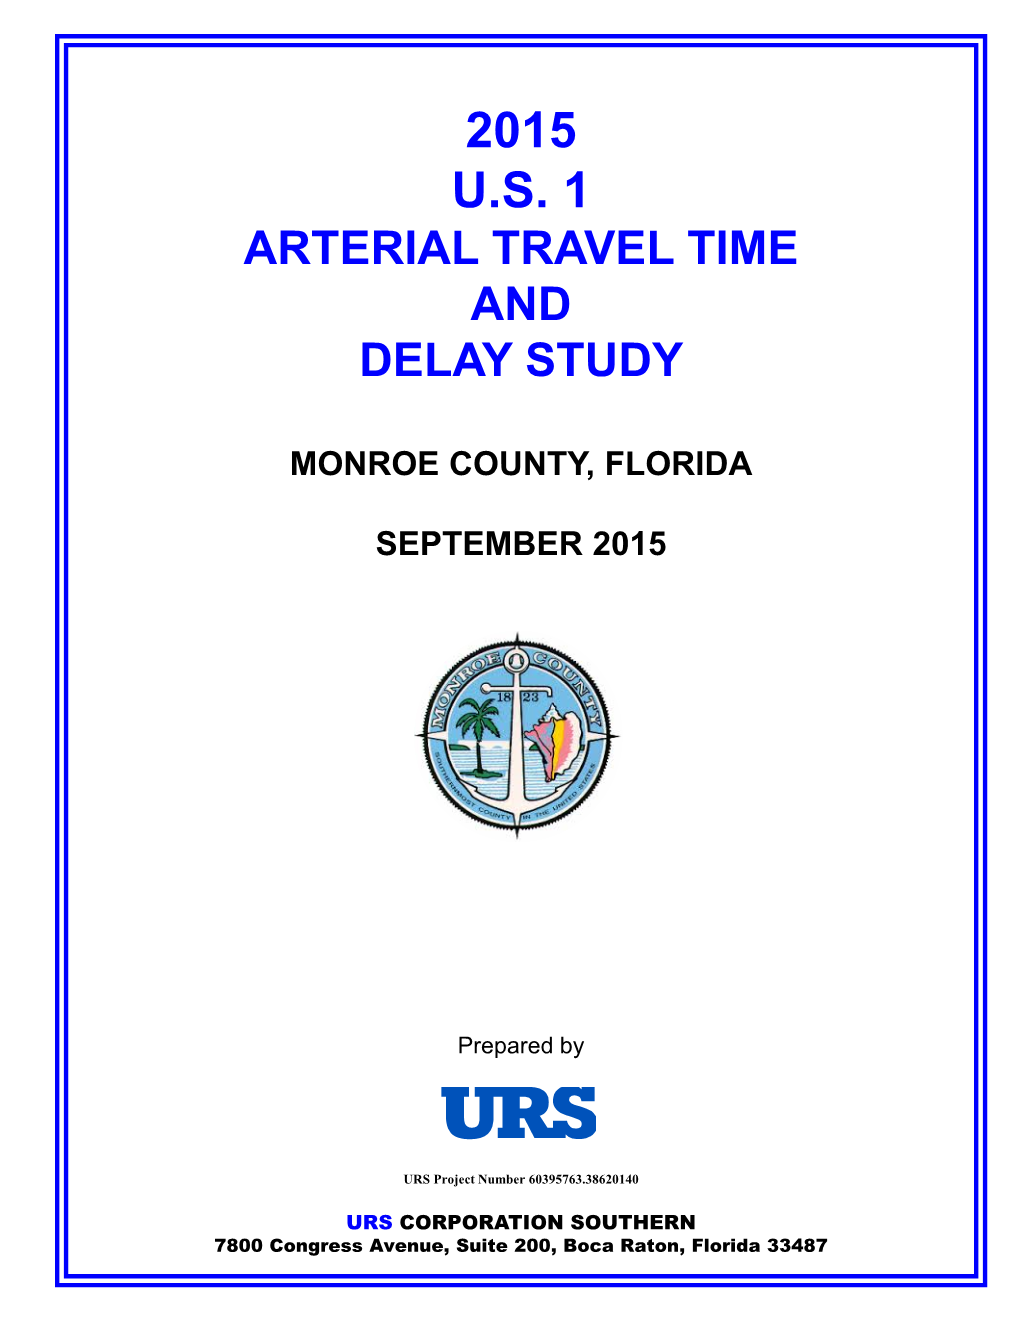 2015 U.S. 1 Arterial Travel Time and Delay Study